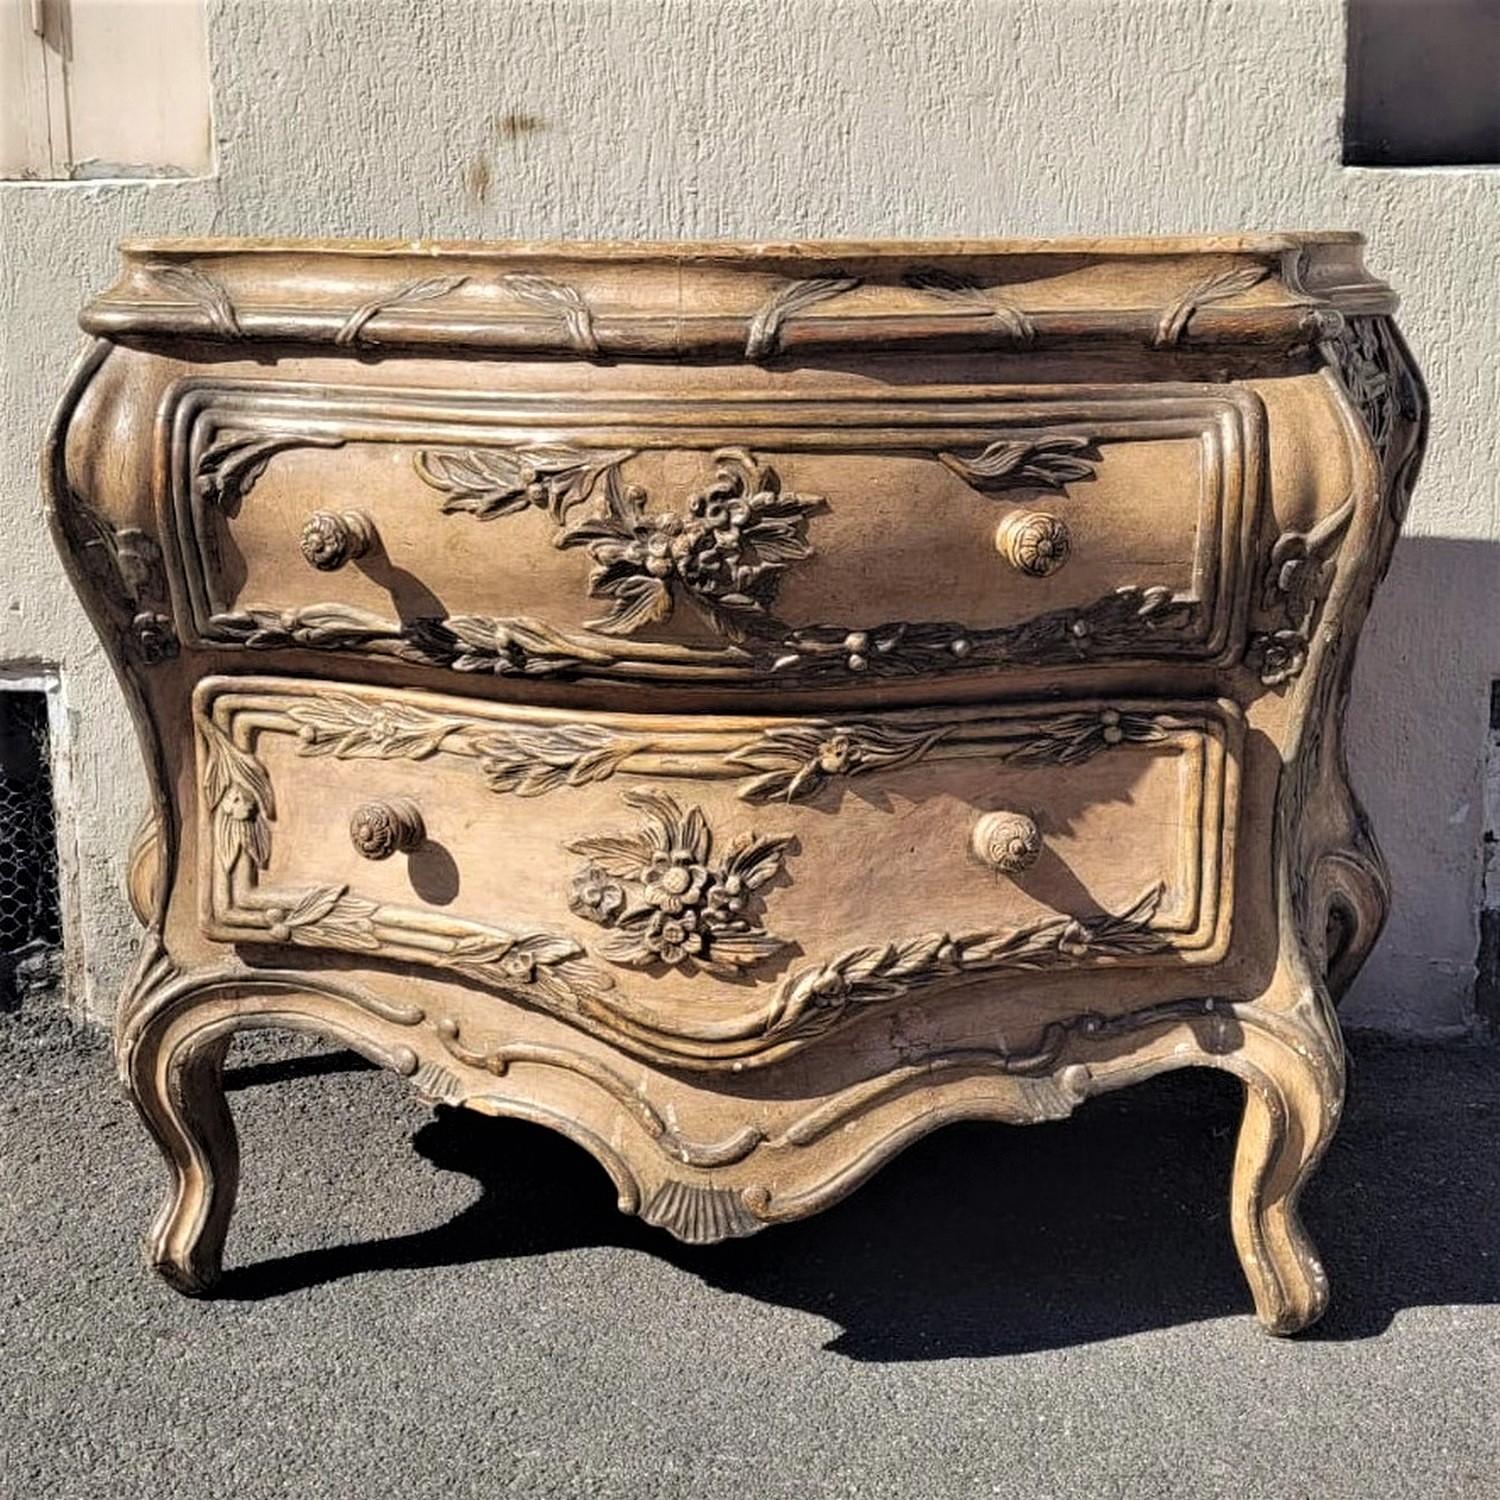 Wood Painted Curved Commode, Venice, Louis XV Style, Xixth Century